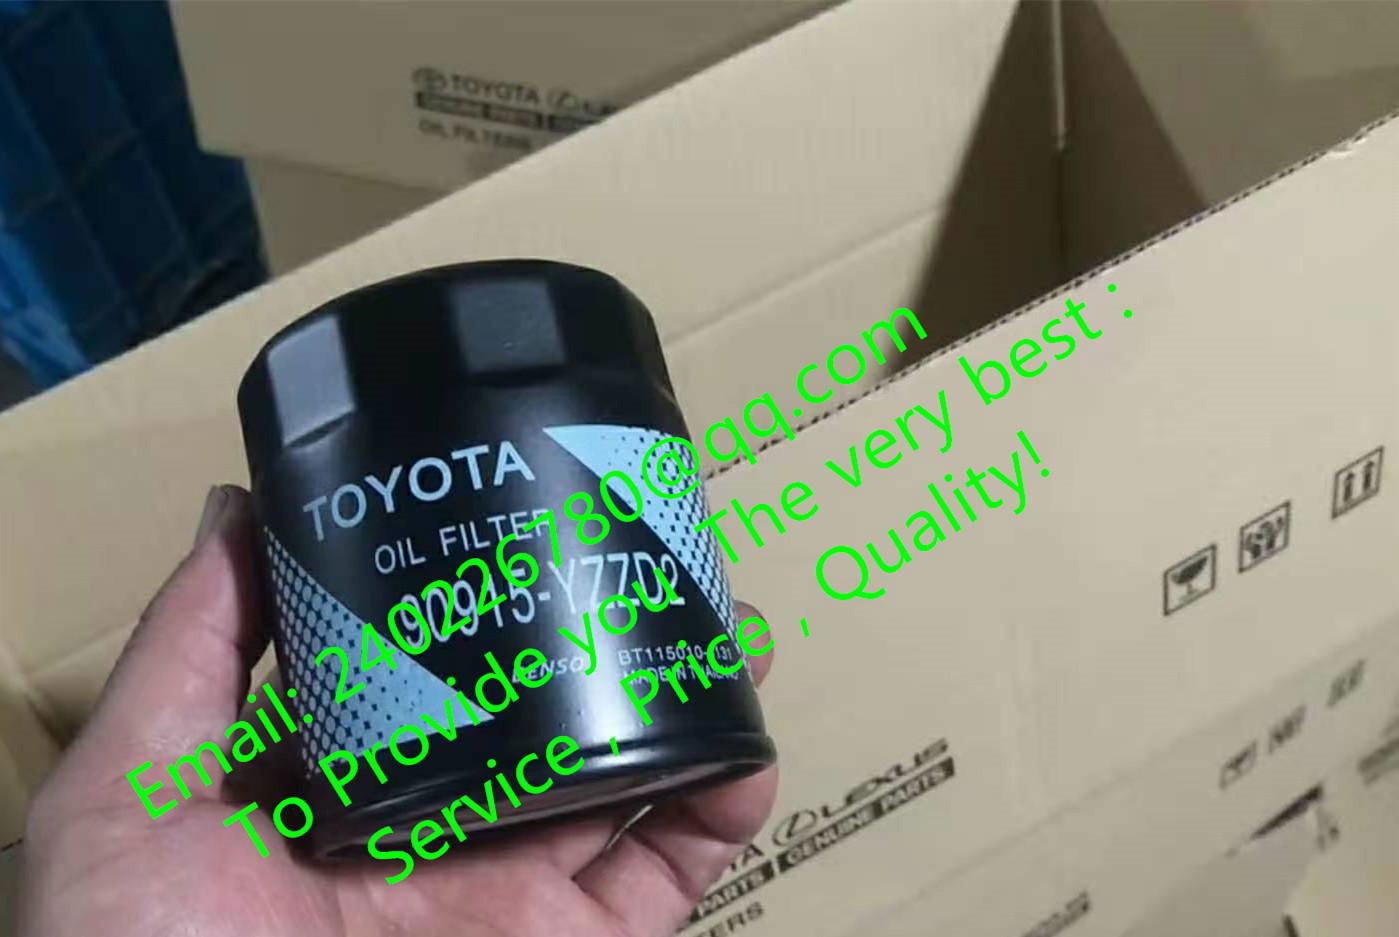 FOR TOYOTA Camry Oil Filter 90915-YZZD2 90915-TB001 90915-20001 90915-03002   4